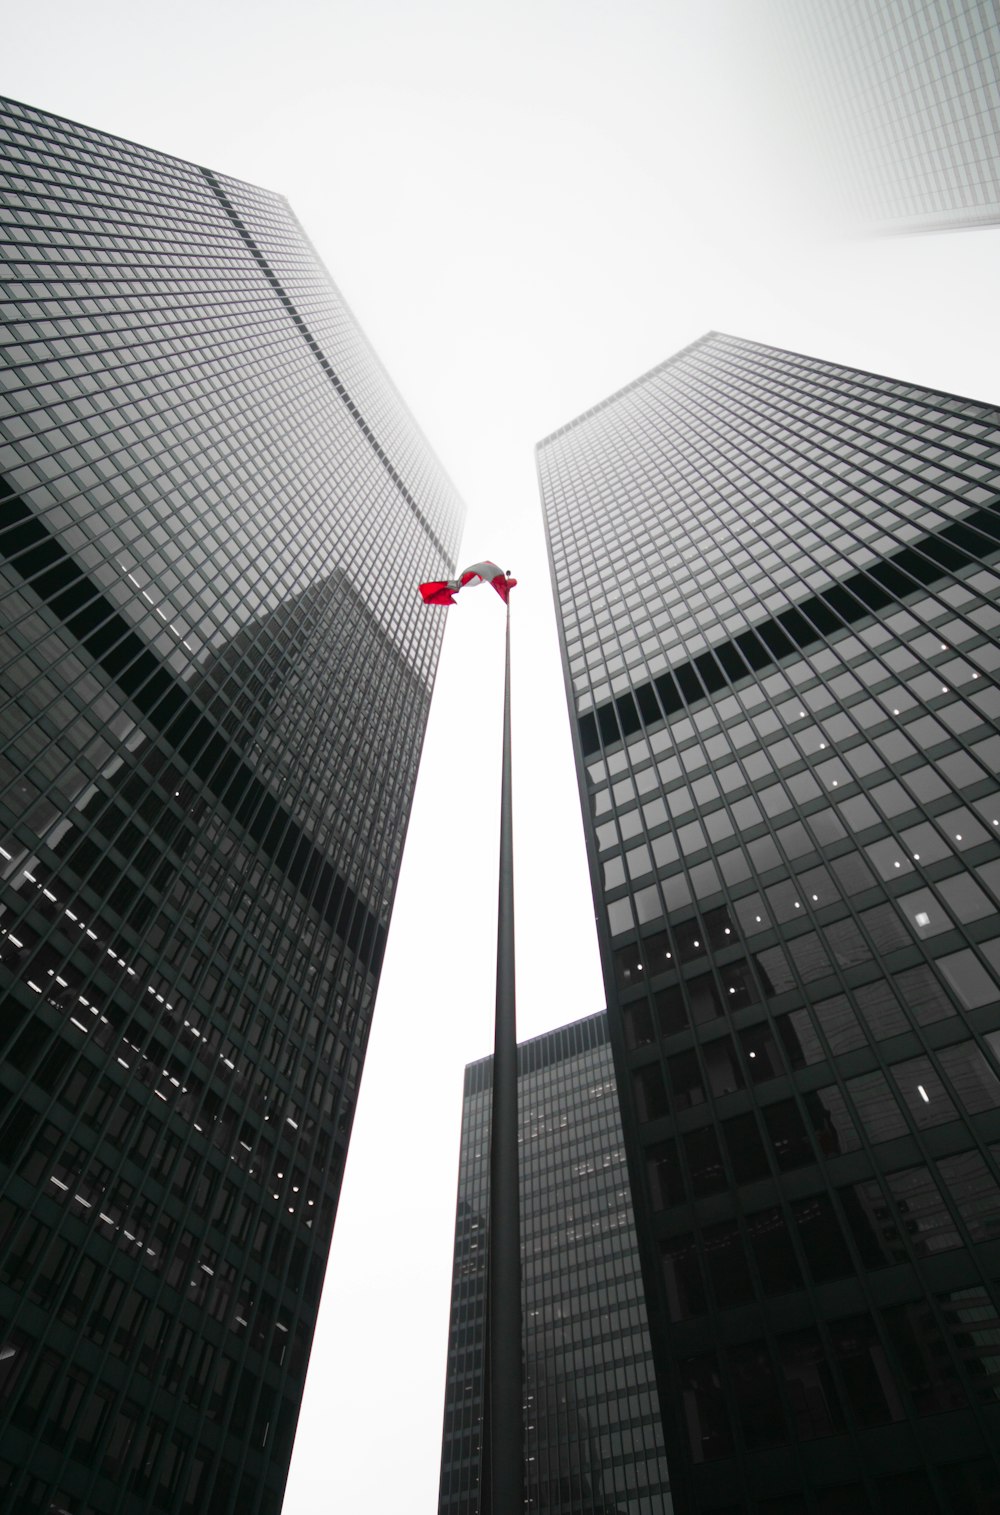 a red kite flying between two tall buildings